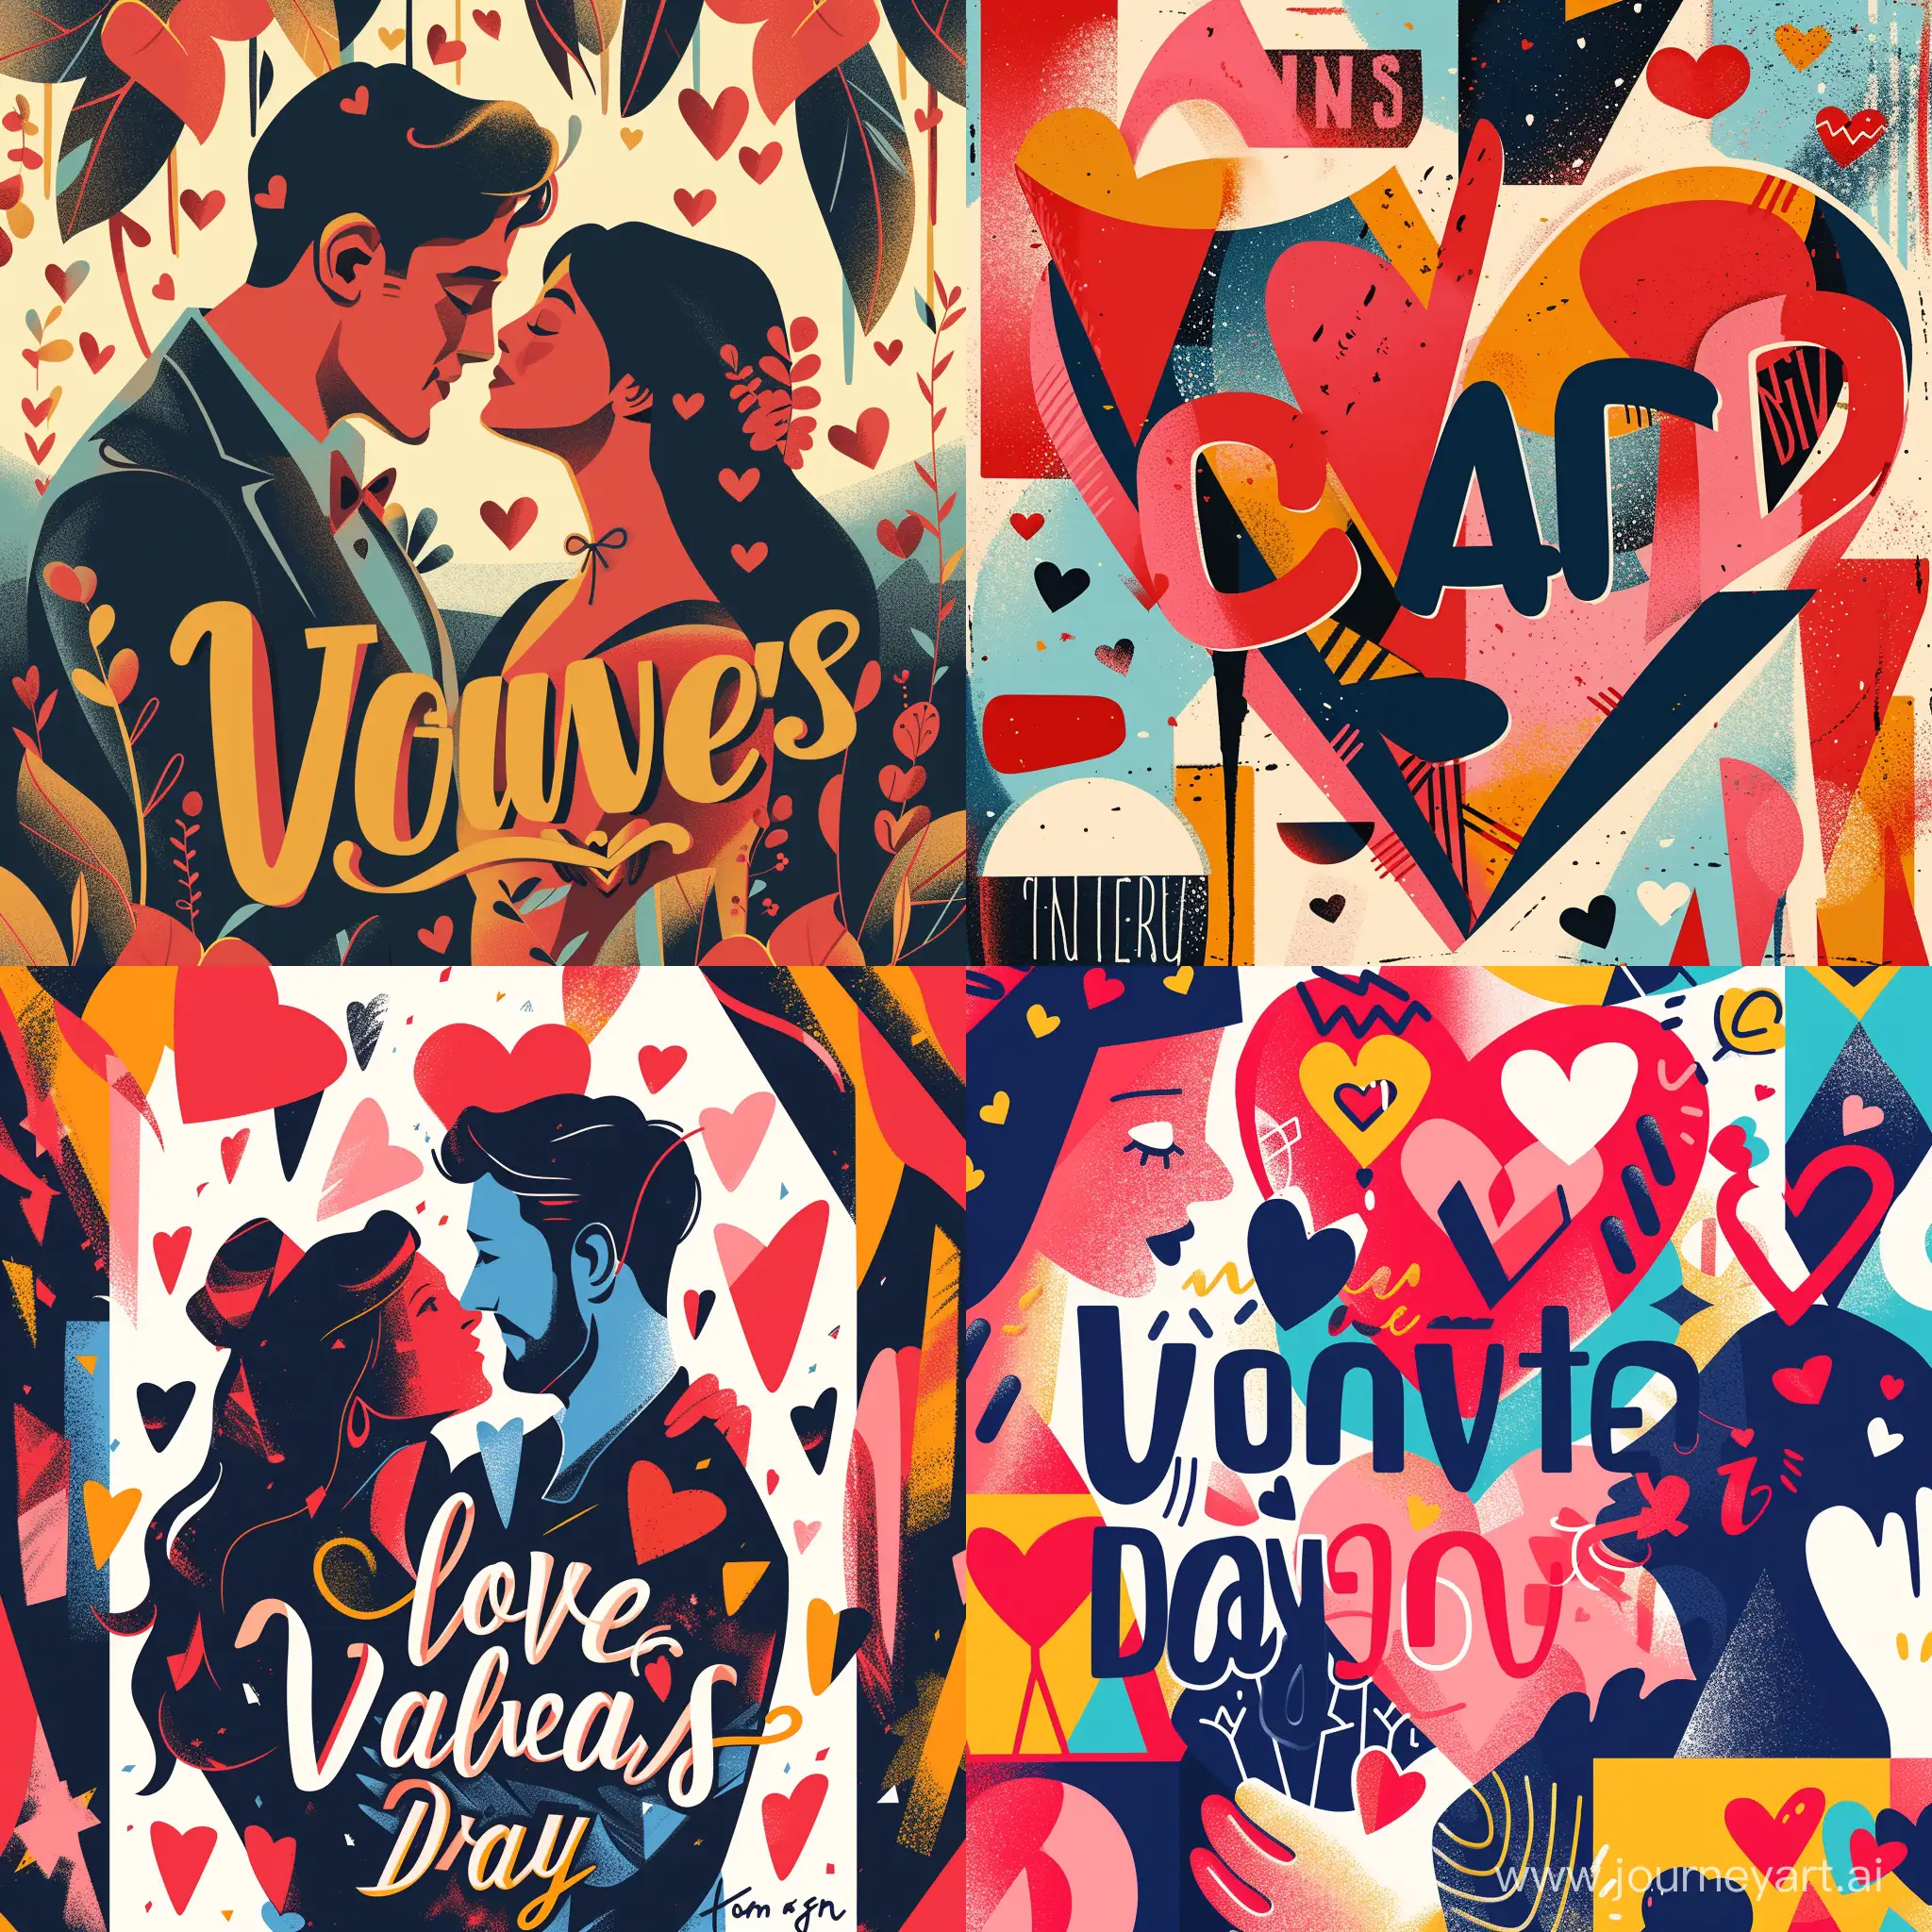 Creative-Valentines-Day-Poster-Express-Love-with-Bold-Typography-and-Vibrant-Imagery